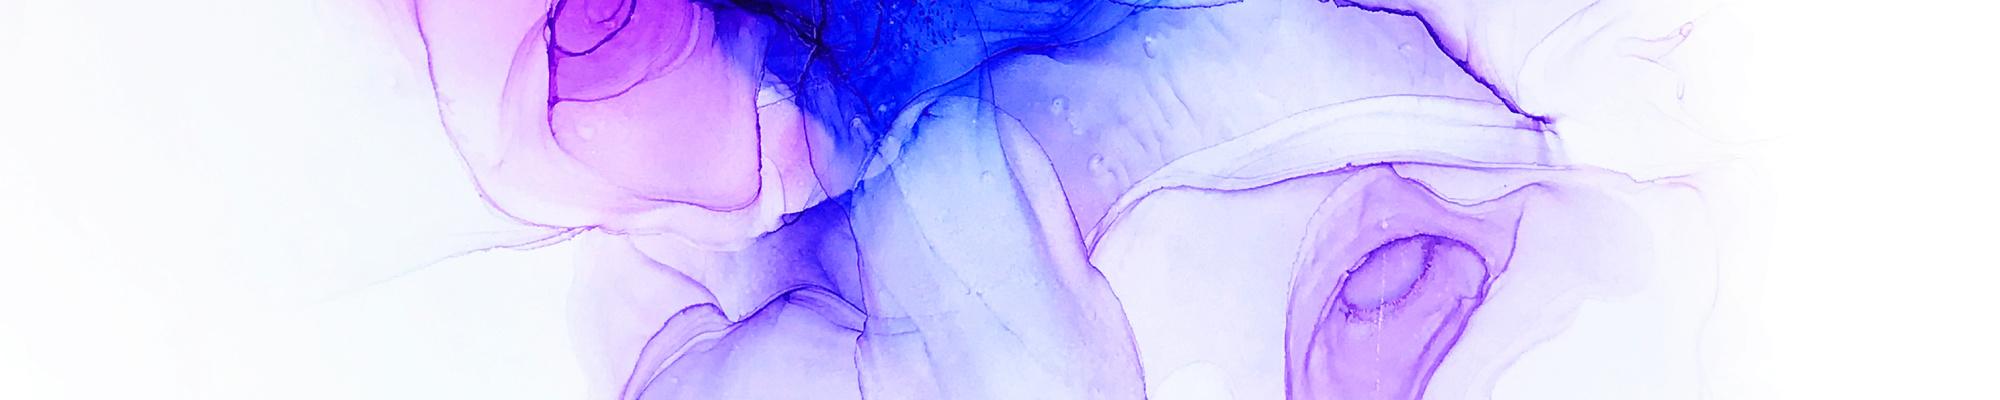 Image is an abstract watercolor with pink, purple and blue.